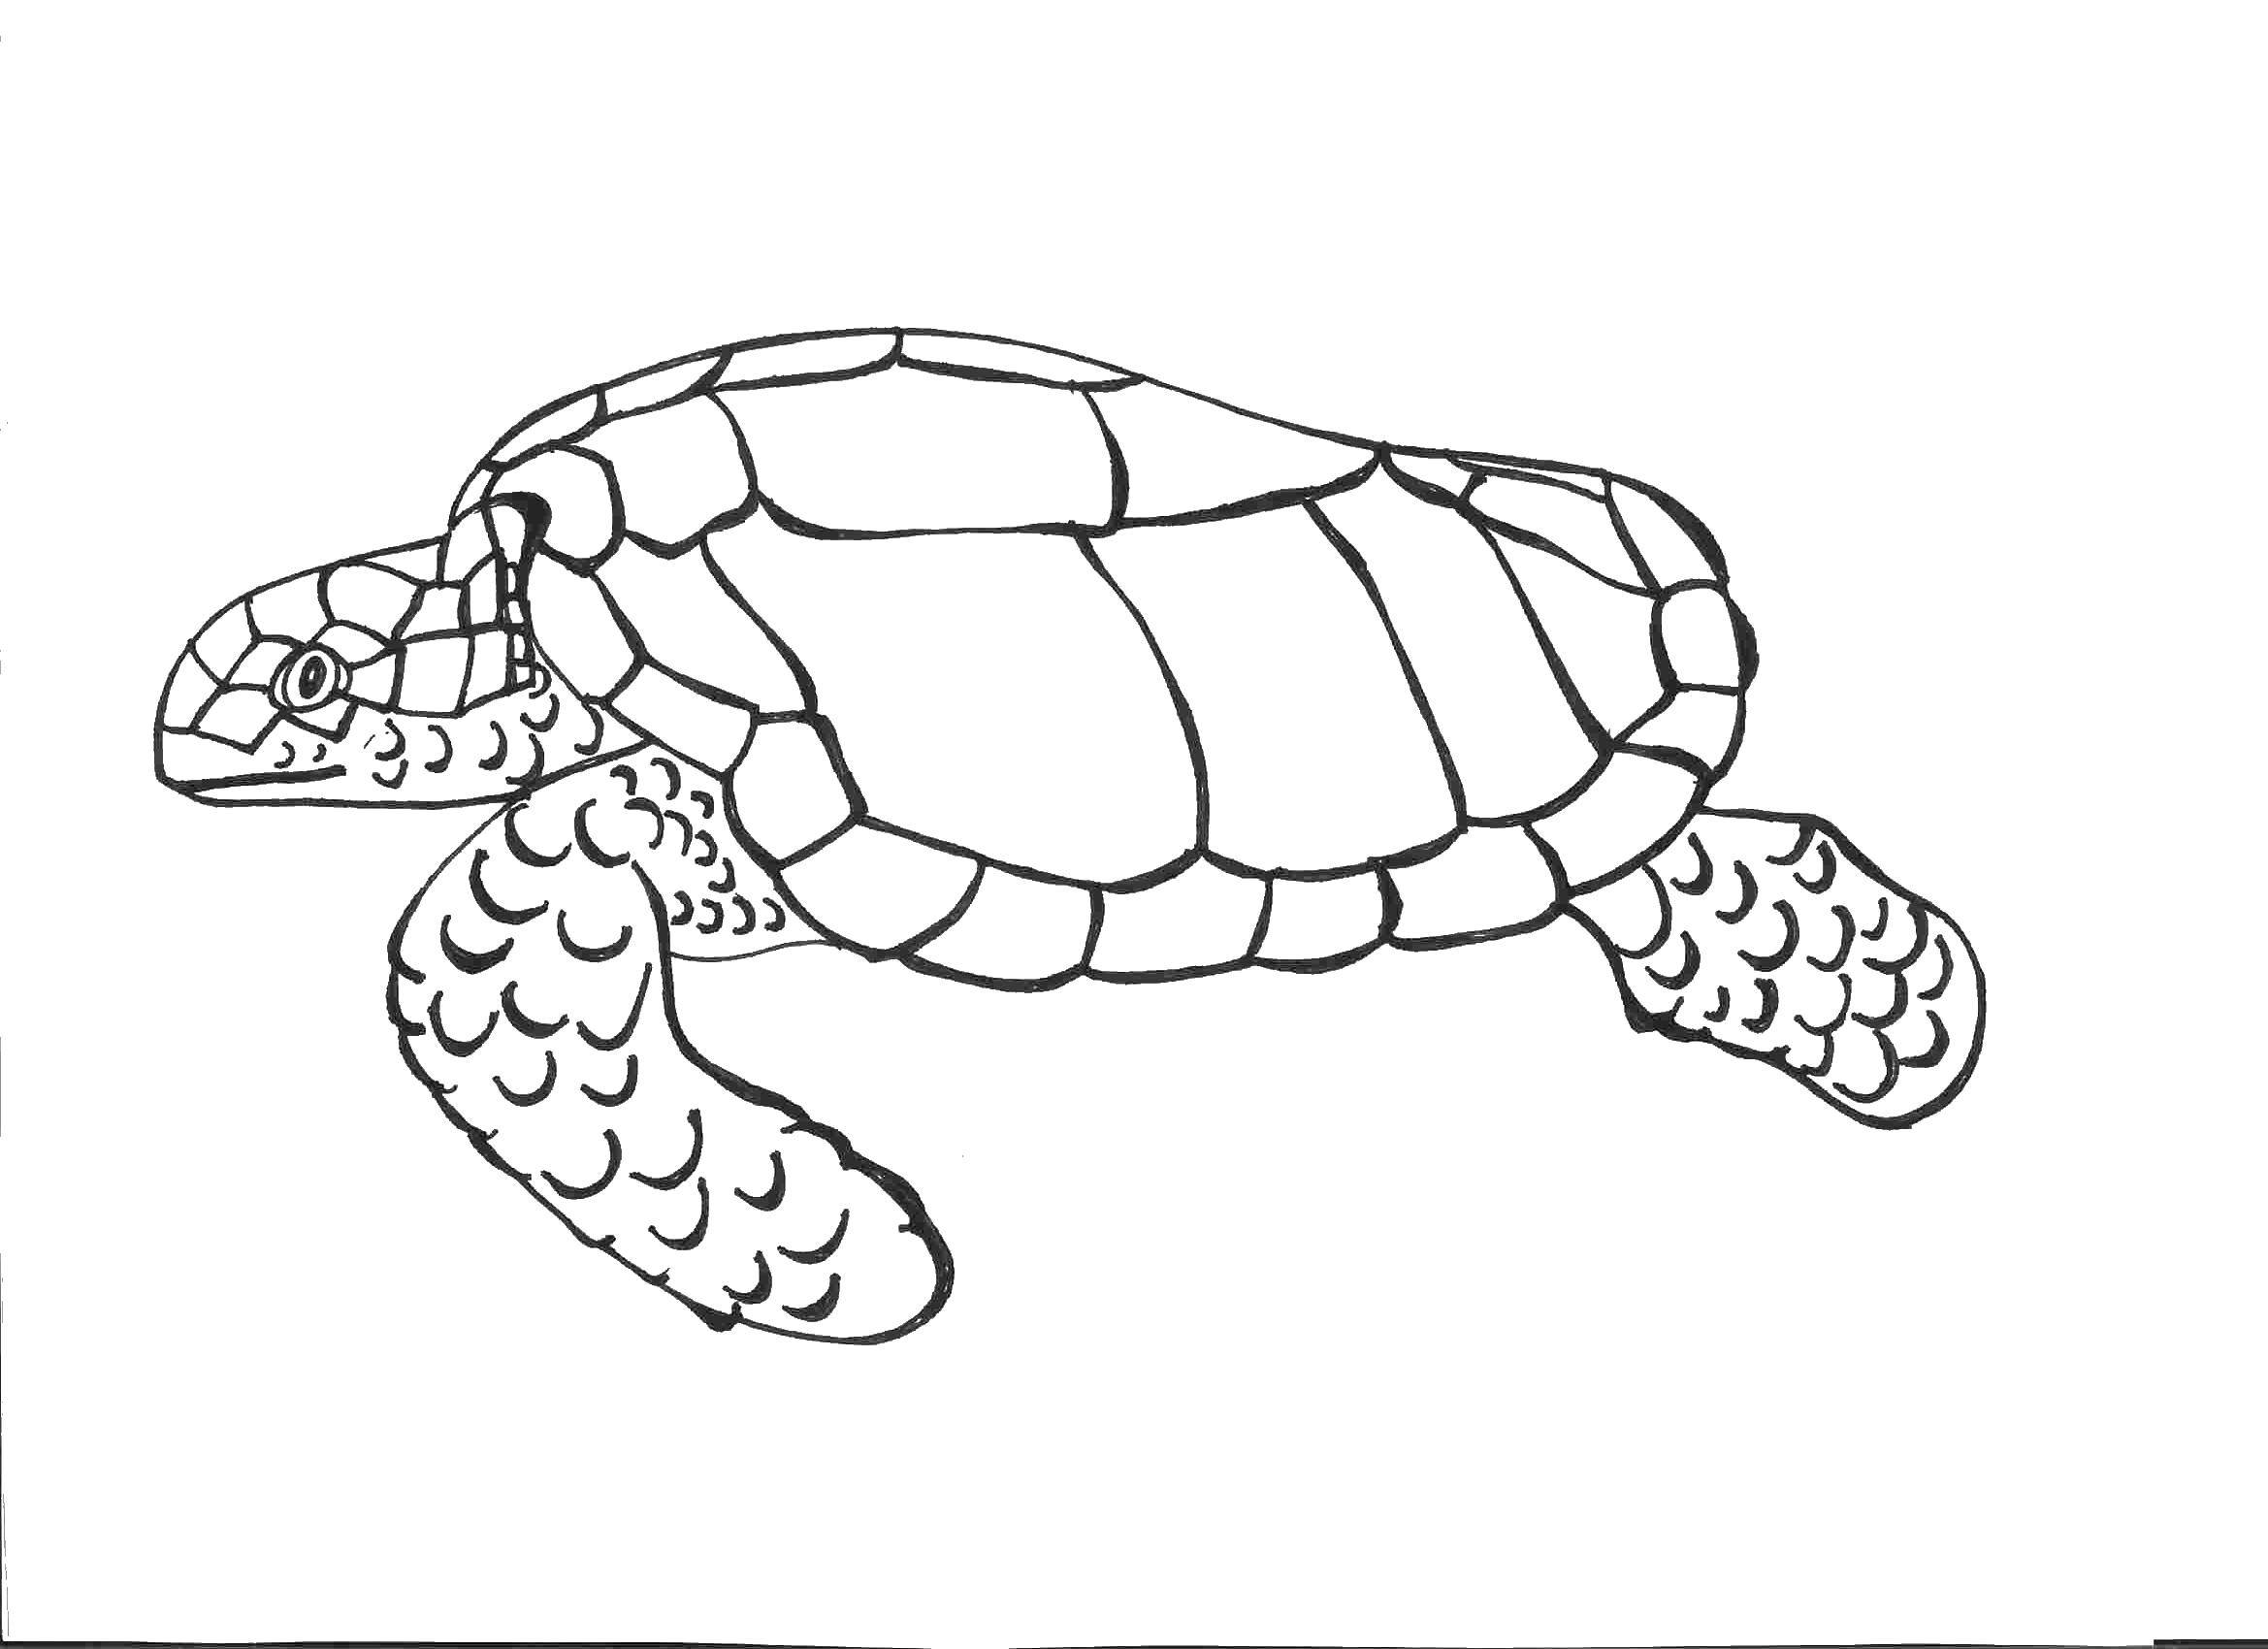 Coloring The turtle is crawling. Category Sea turtle. Tags:  Reptile, turtle.